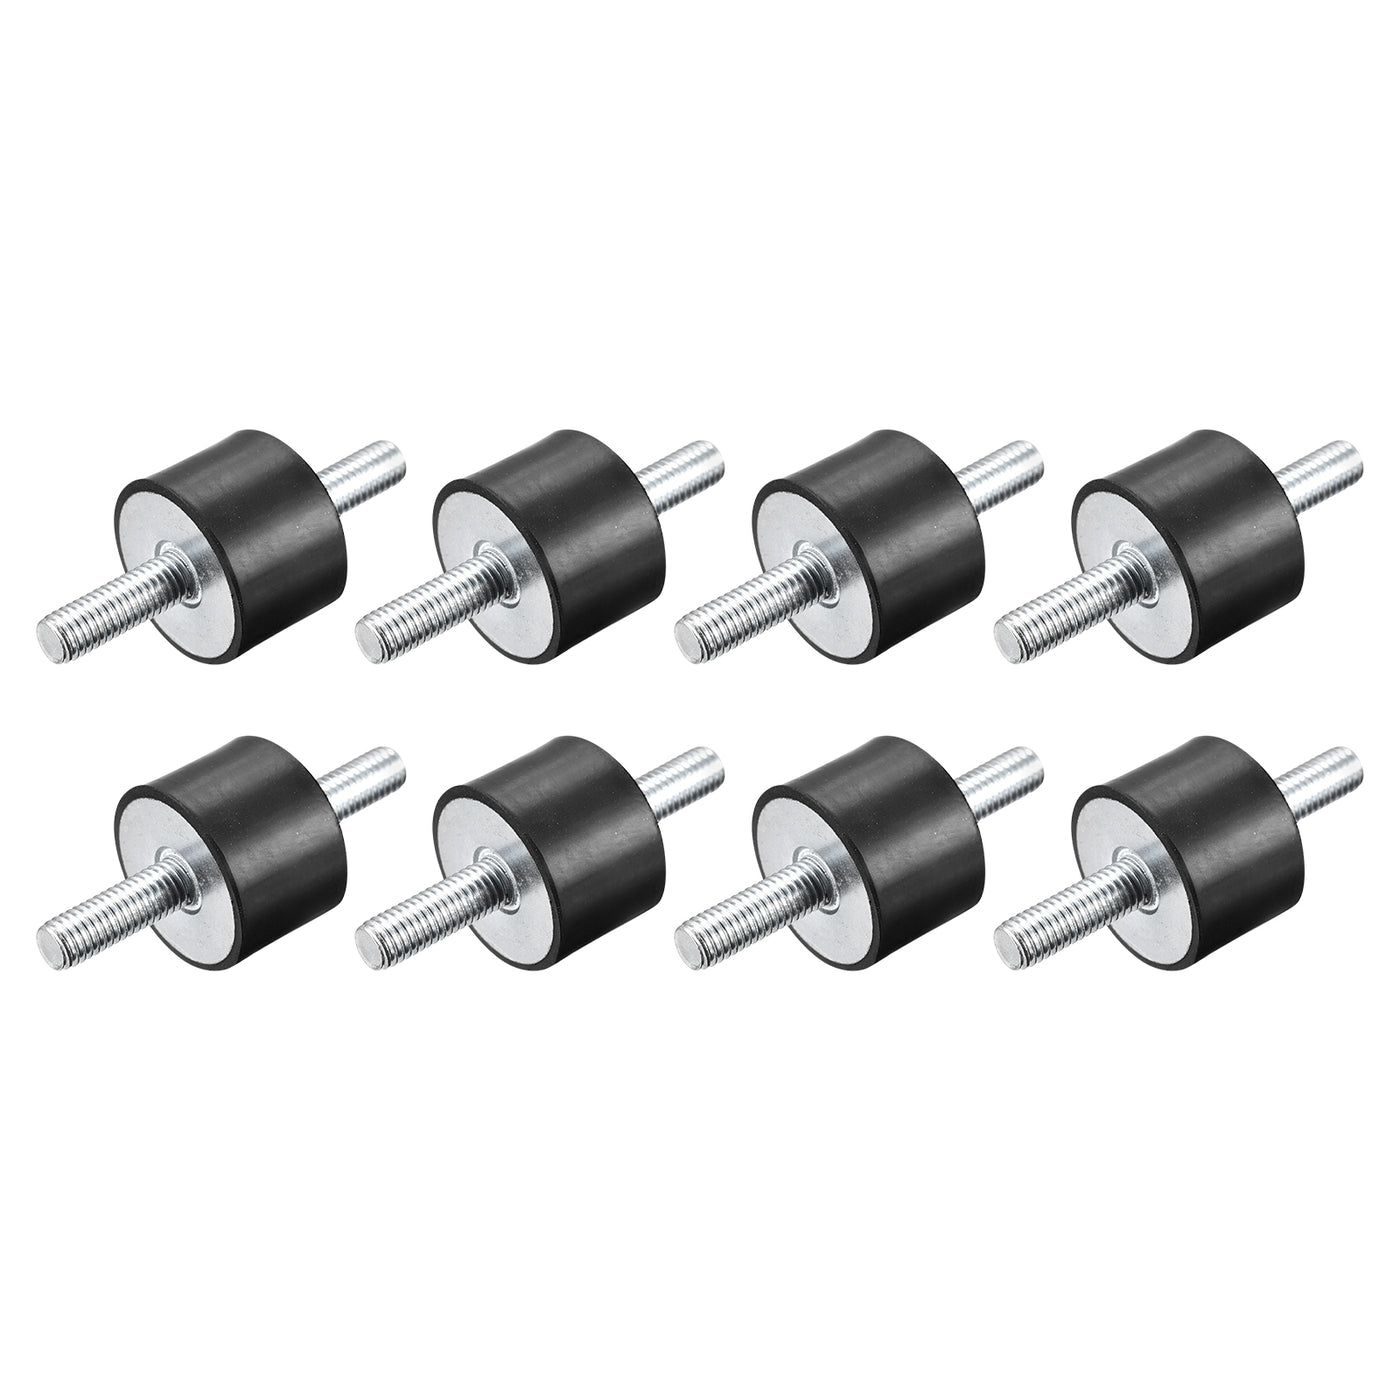 uxcell Uxcell Rubber Mounts 8pcs M8x23mm Male Vibration Isolator Shock Absorber D30mmxH20mm